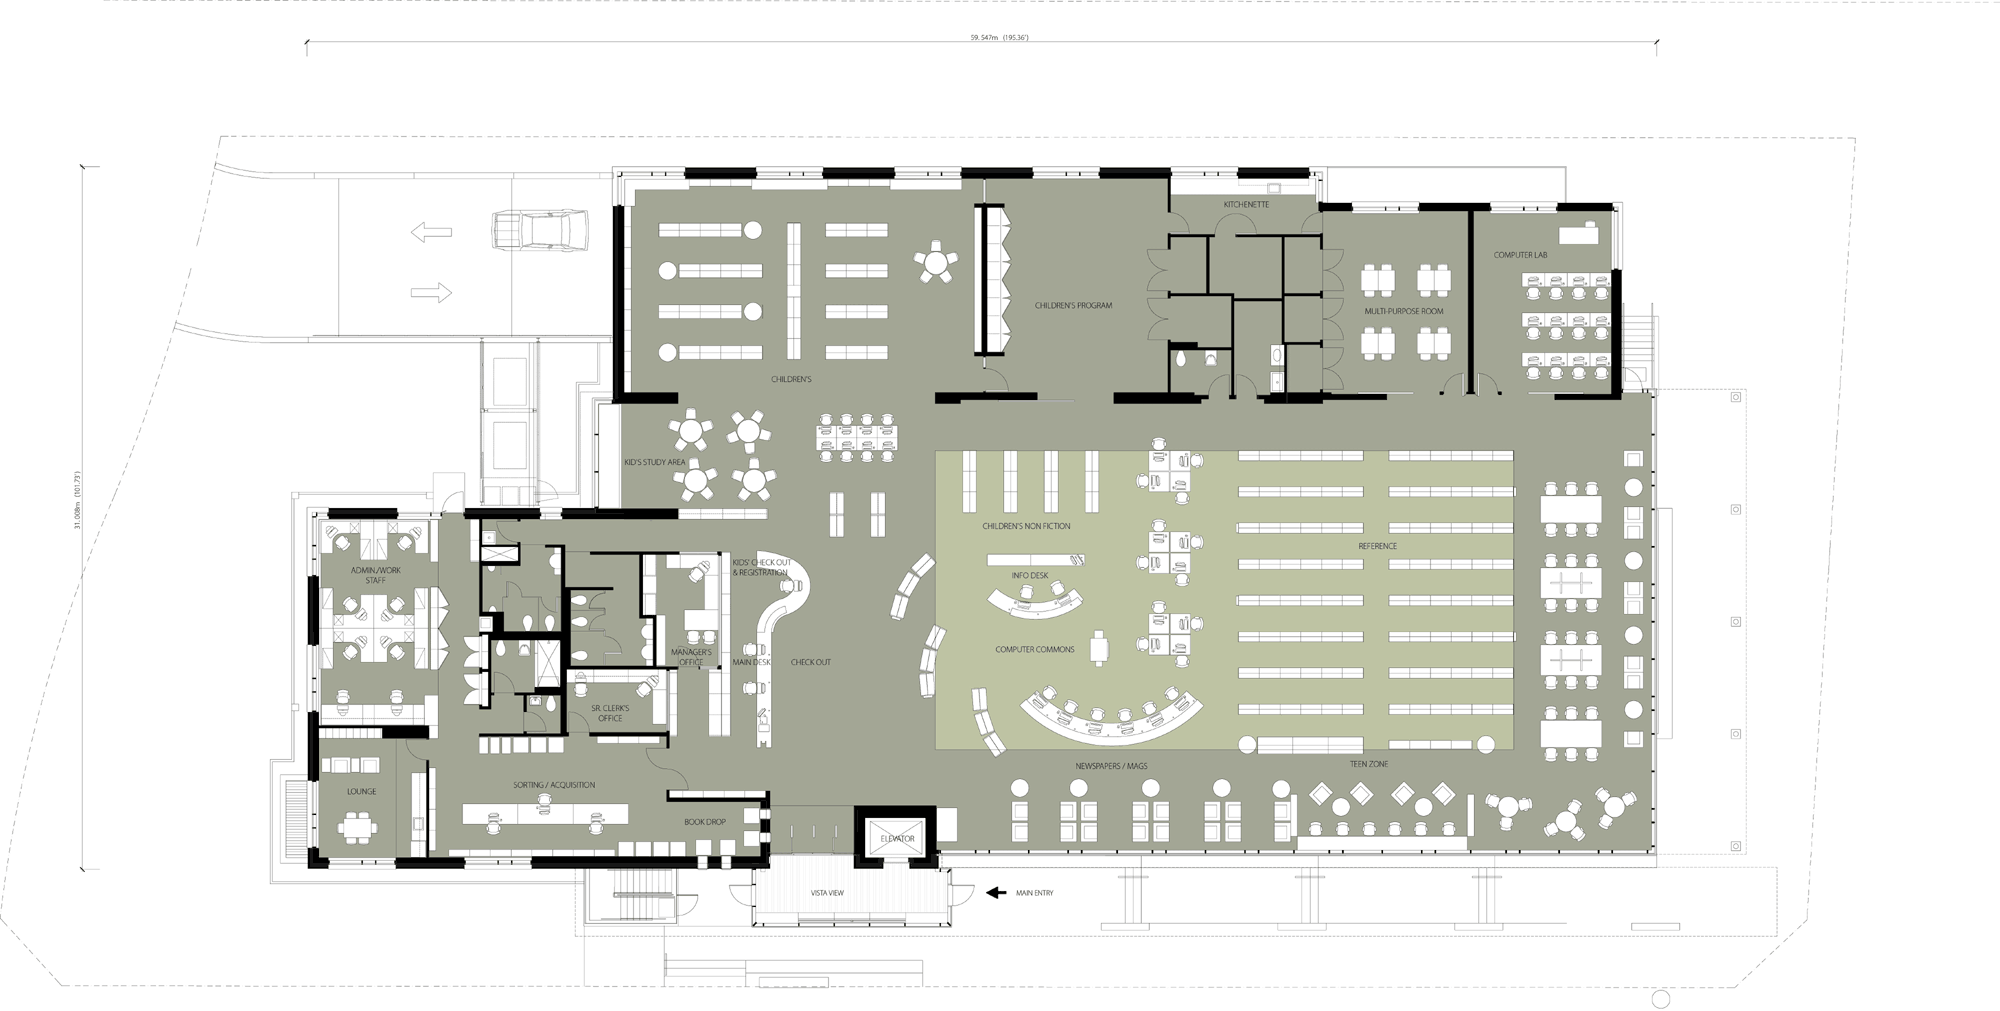 Library Floor Plan Layouts